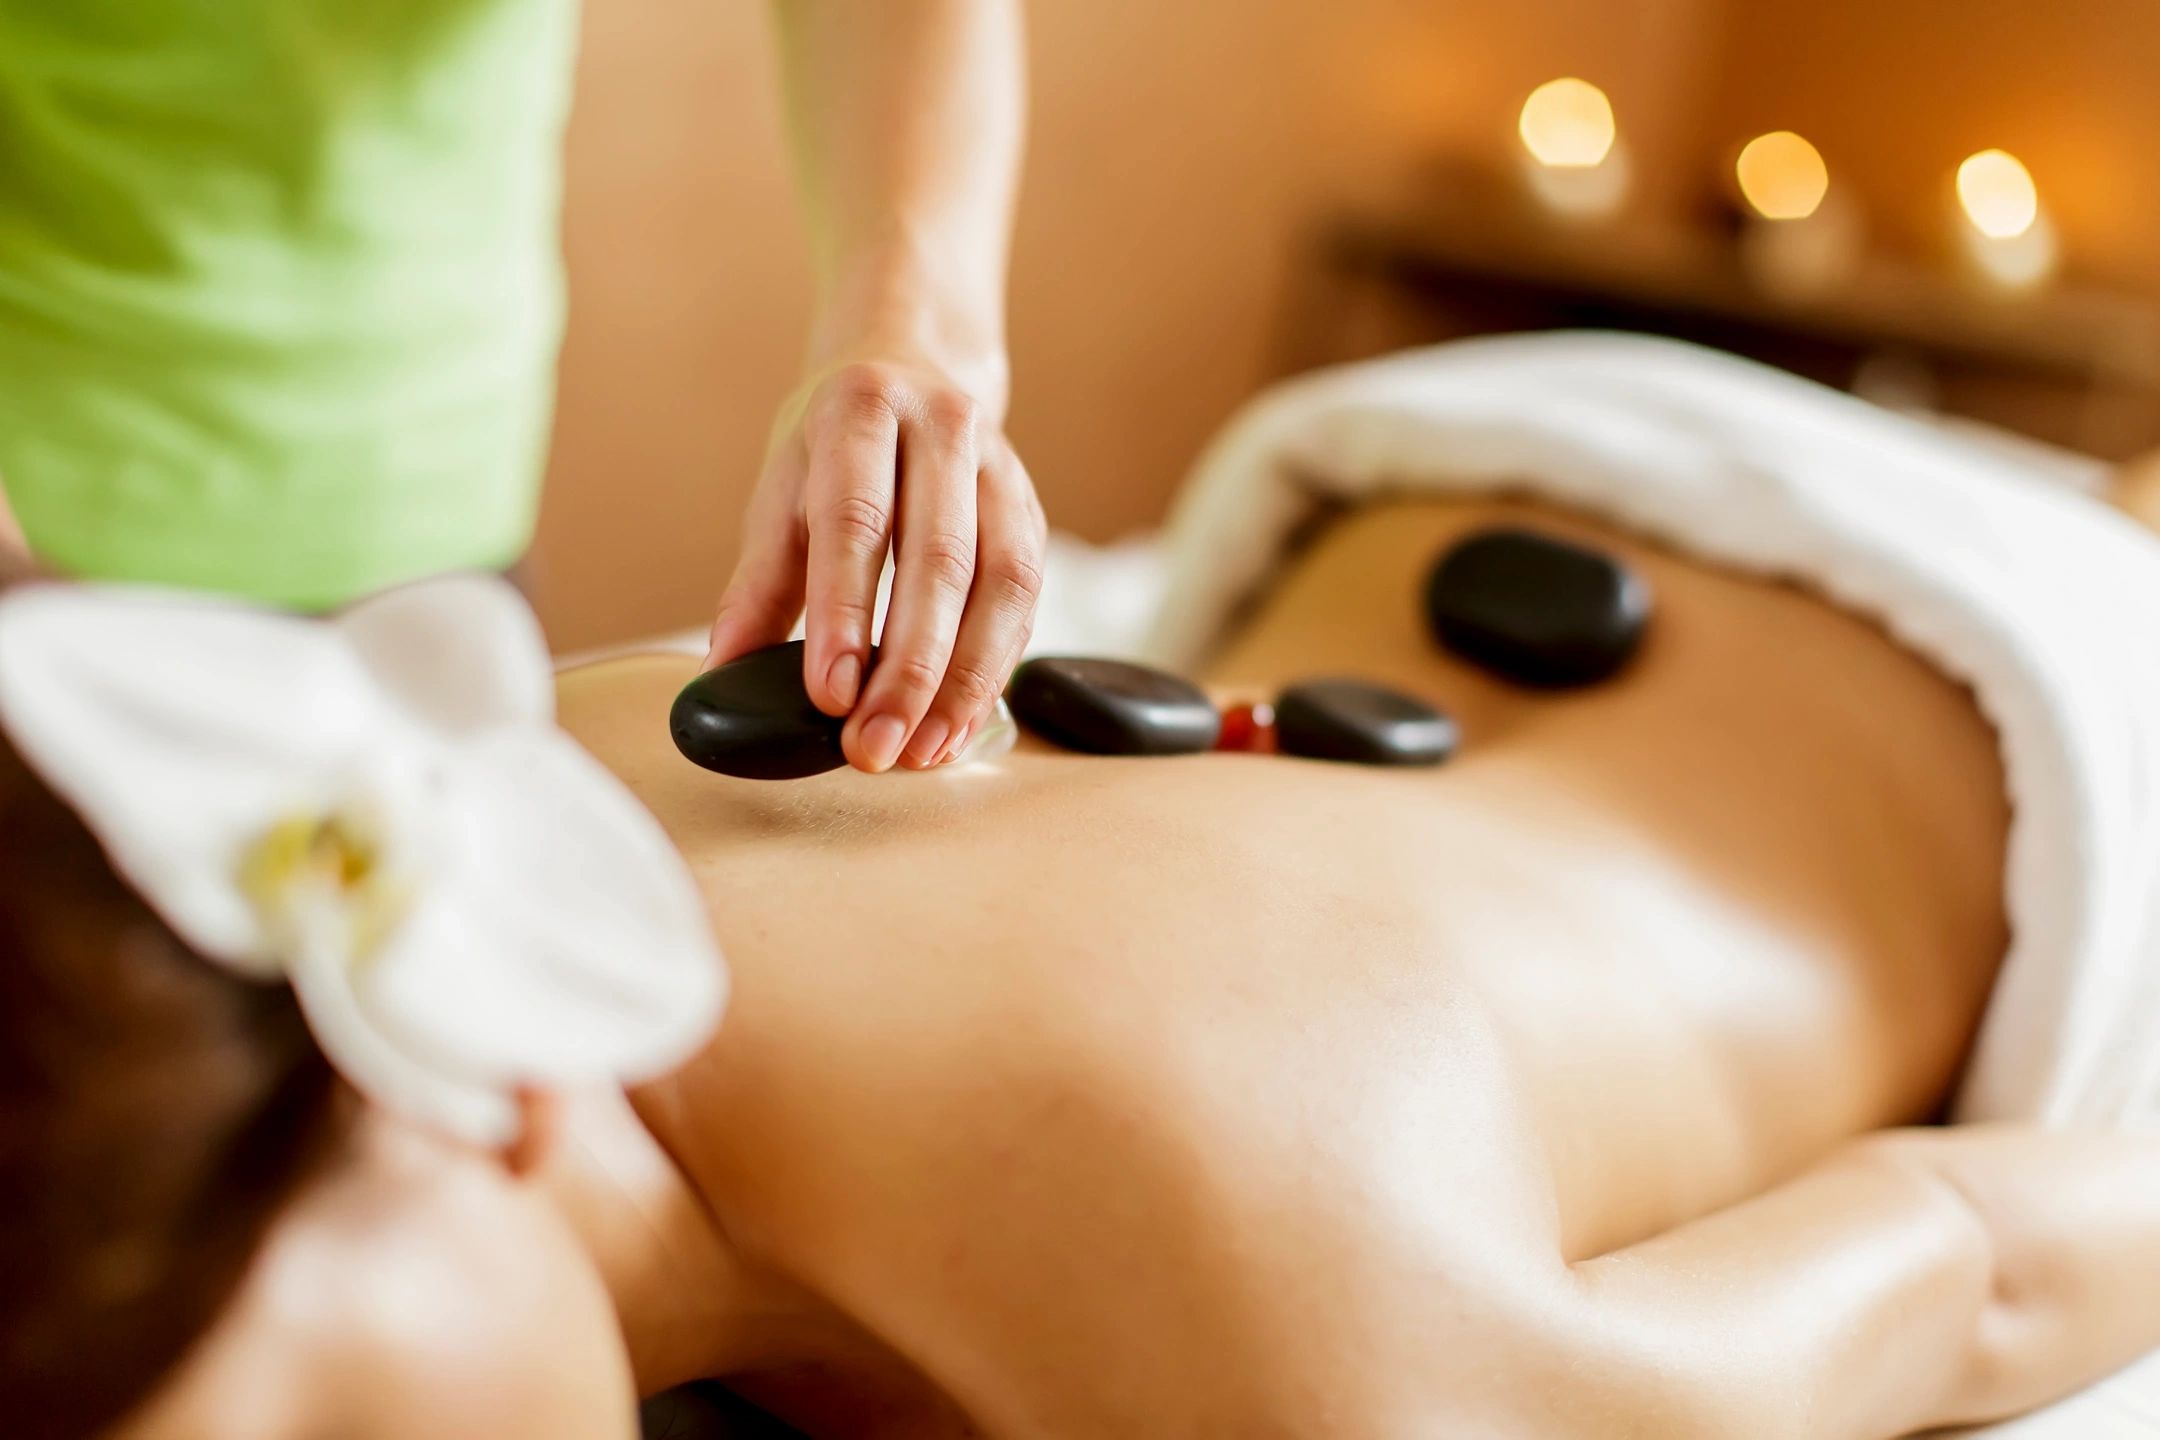 Culpepper Bodywork offers hot stone massage blended with therapeutic modalities. 